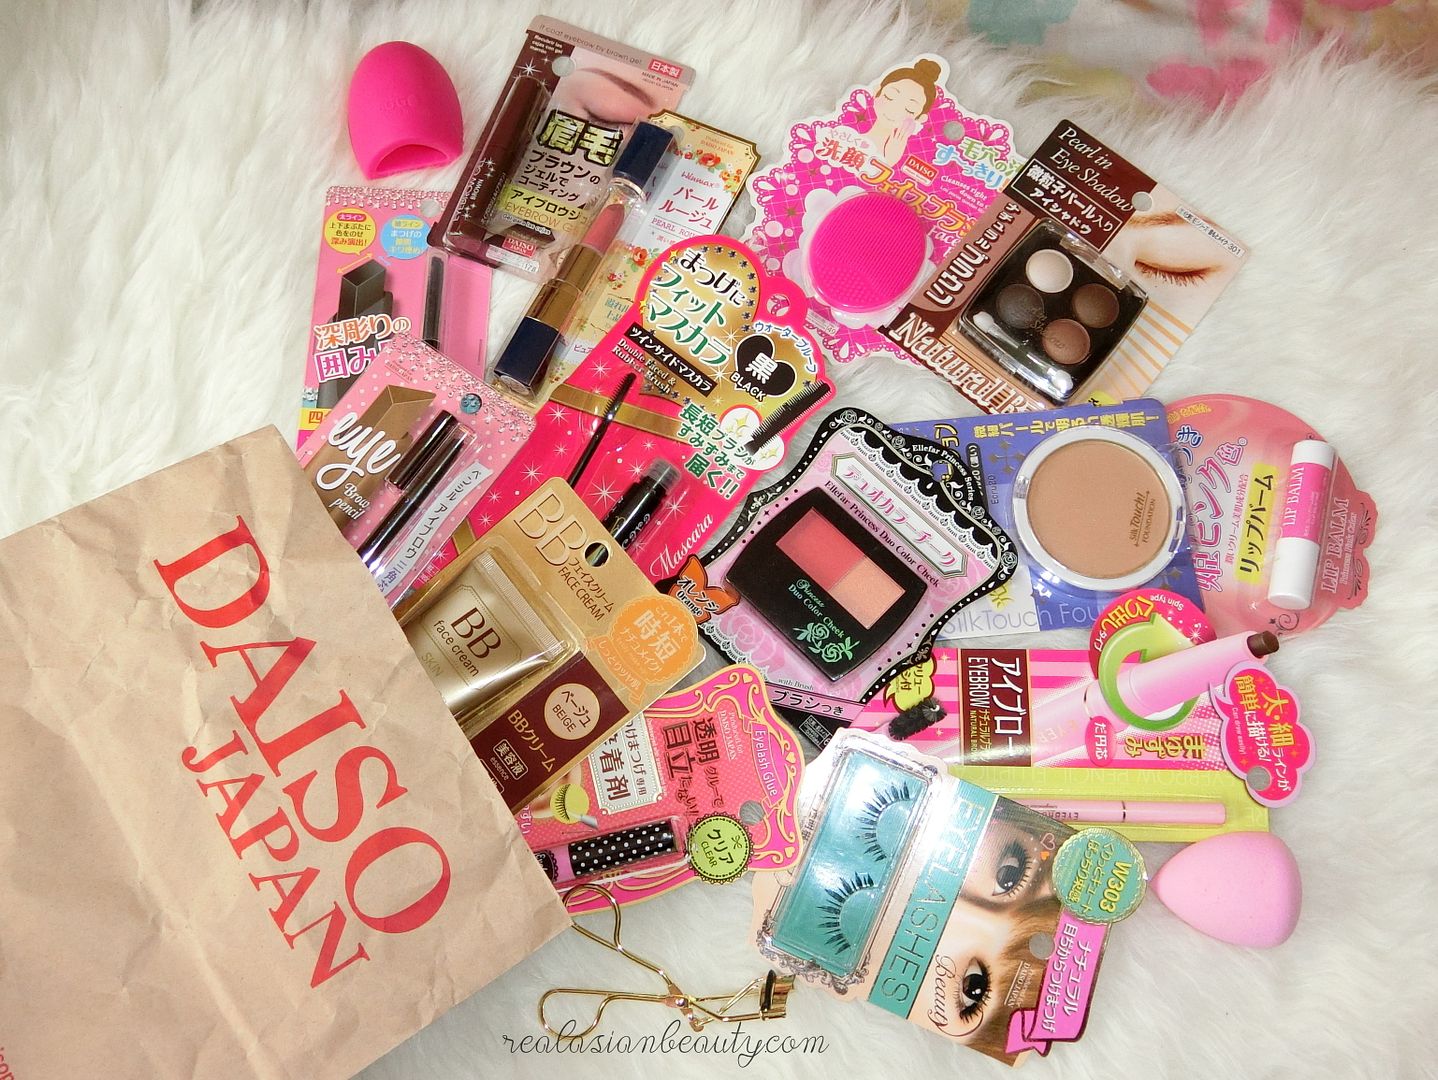 Daiso Japan Makeup Haul + Tutorial and Review! - Beauty And Fashion